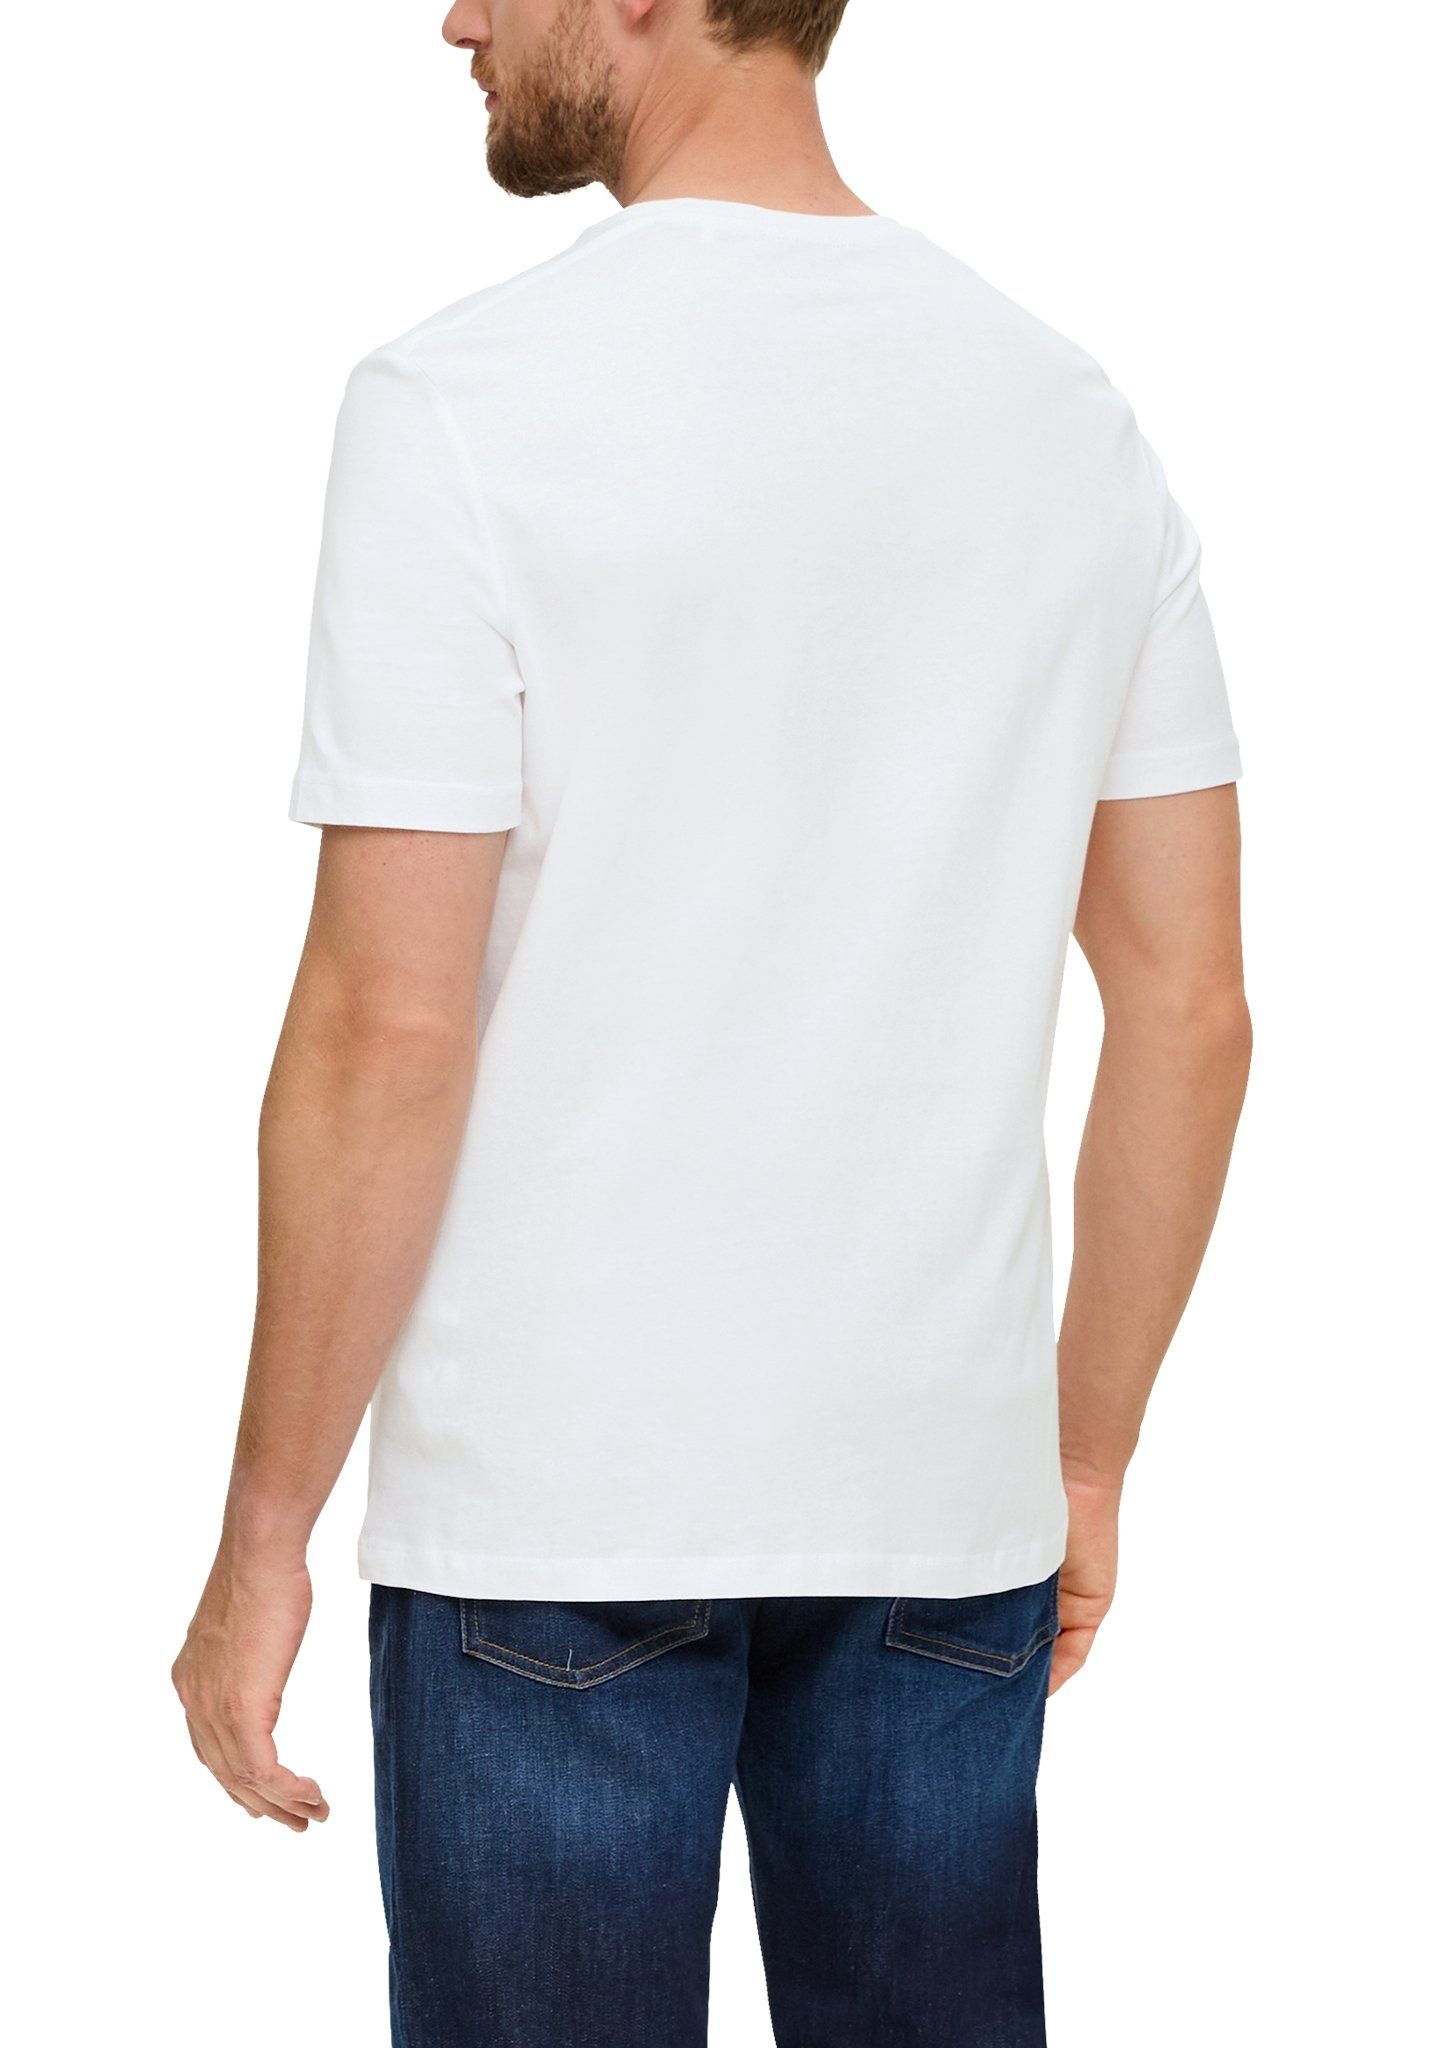 s.Oliver Look im T-Shirt white sportiven